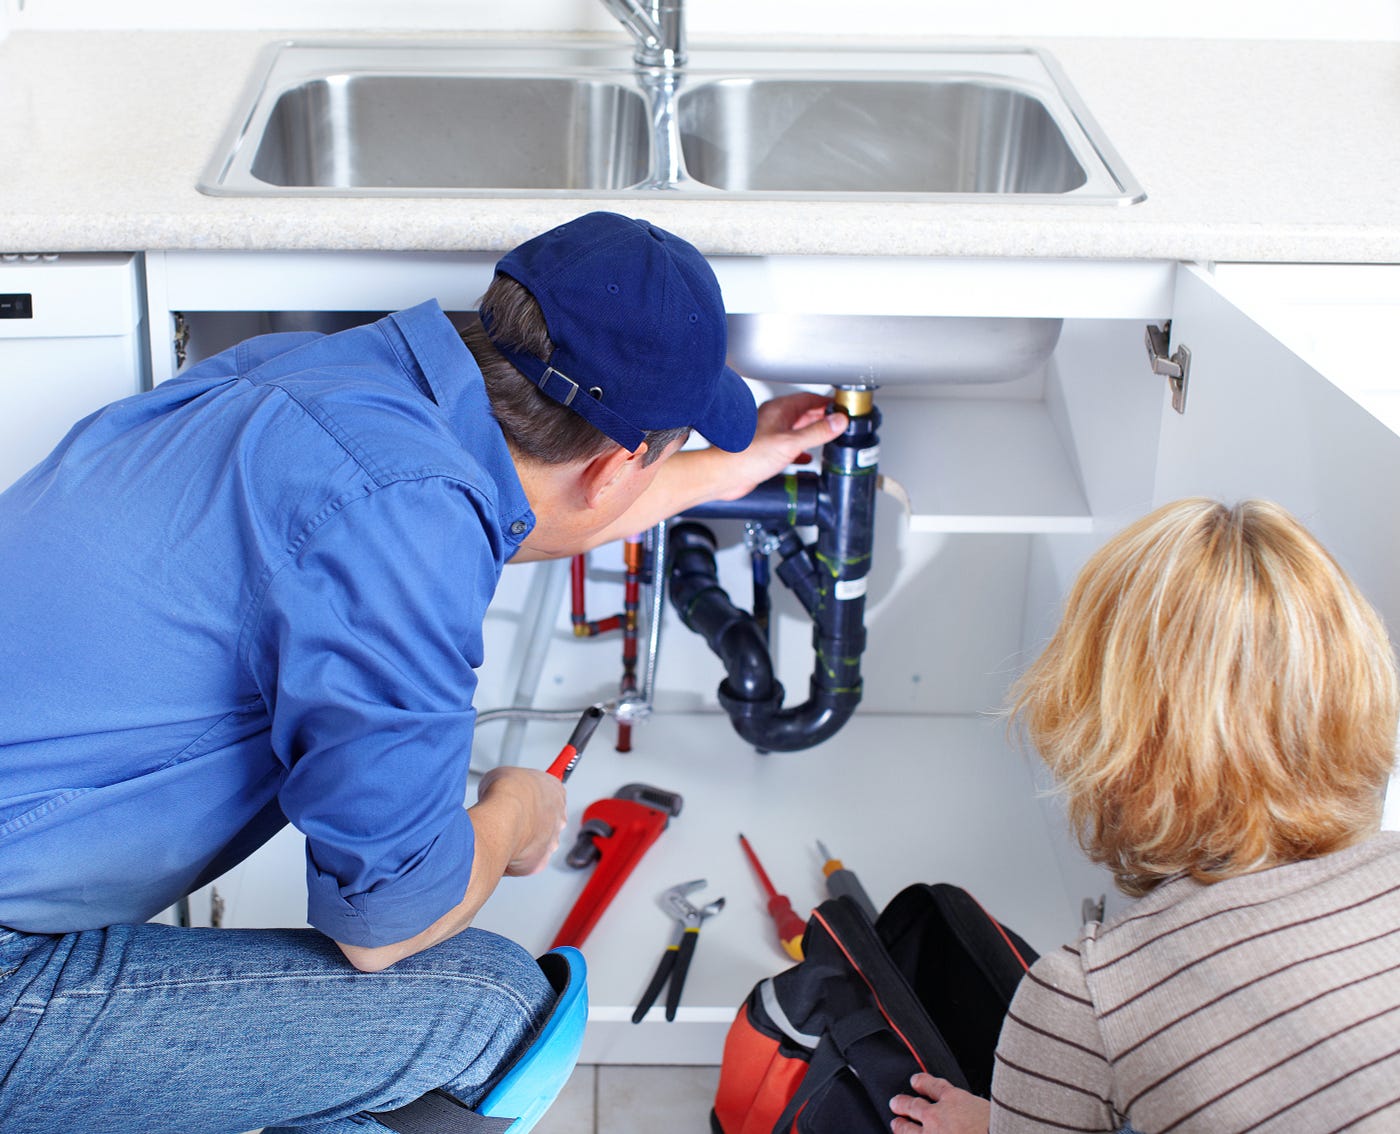 What Is a Plumbing Snake and How Do You Use It? - Overland Park